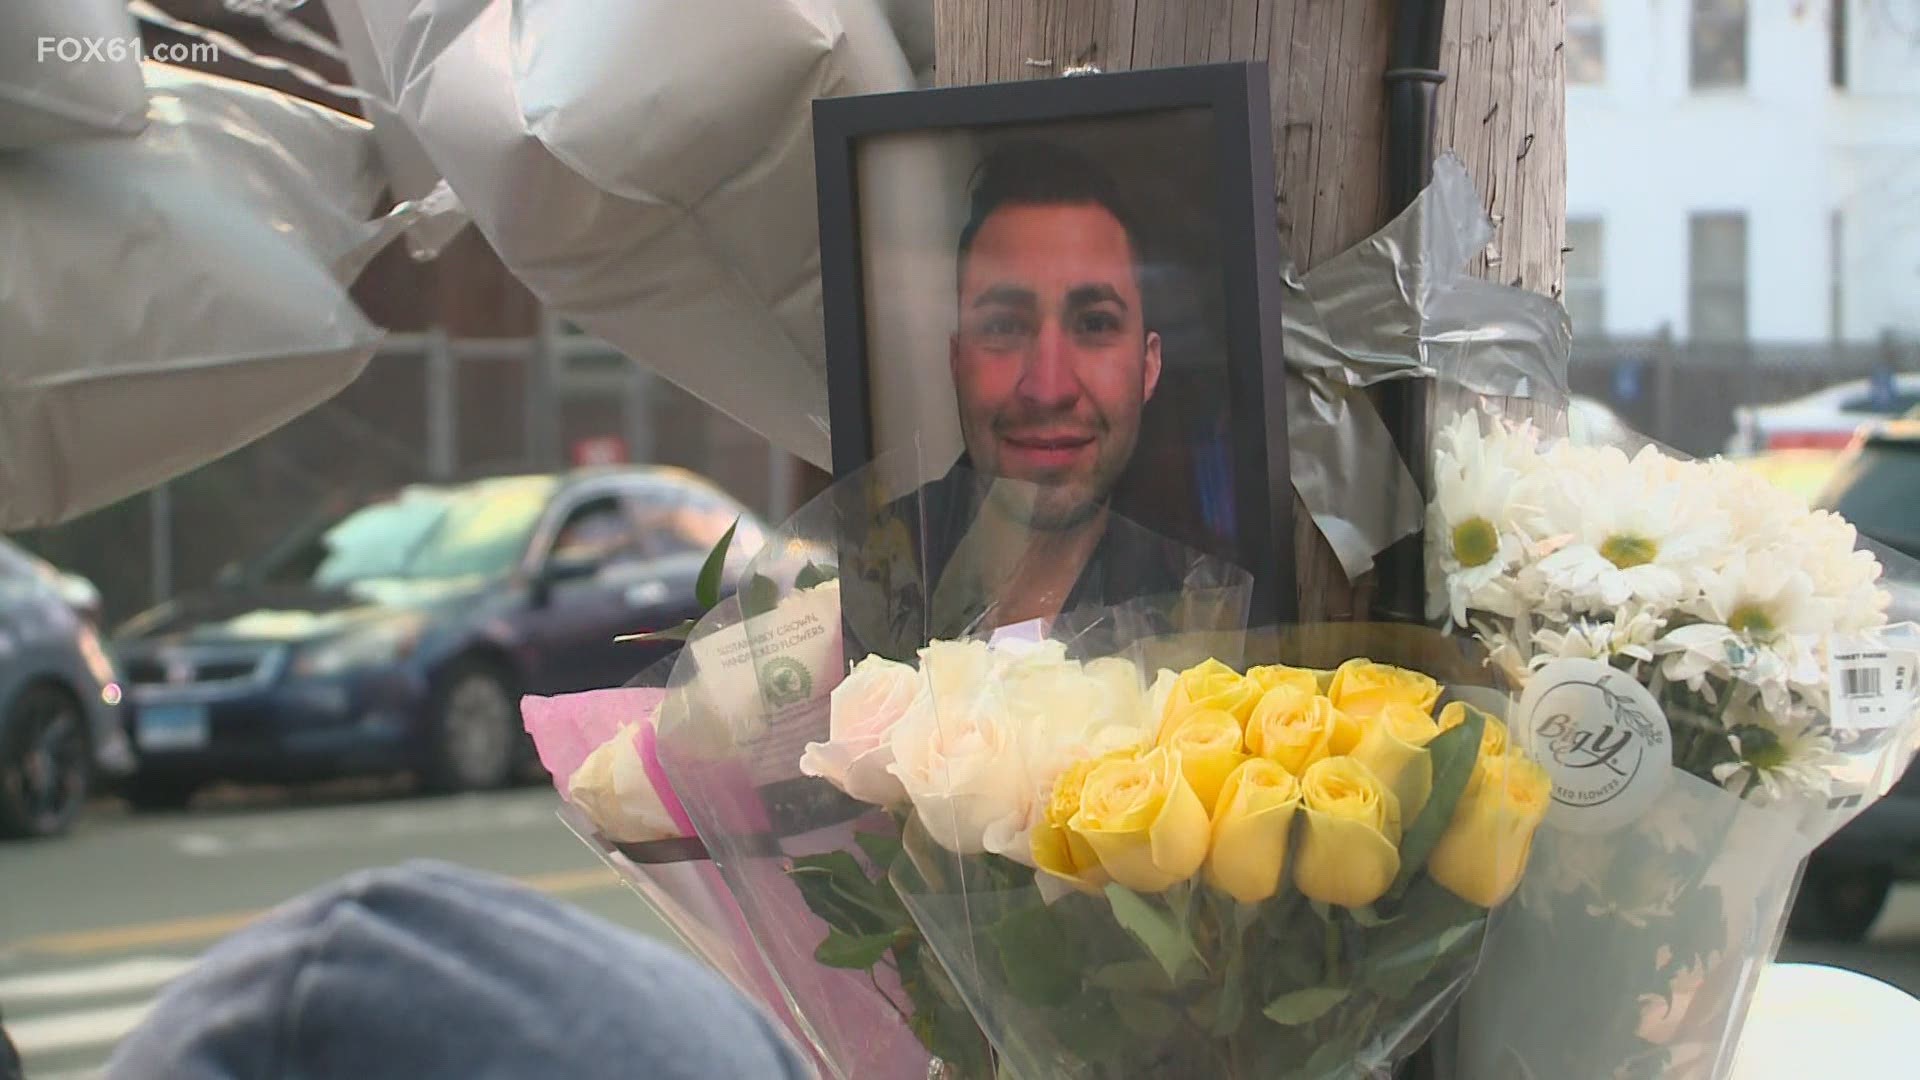 Loved ones gathered Sunday to remember the man who was killed Saturday night.